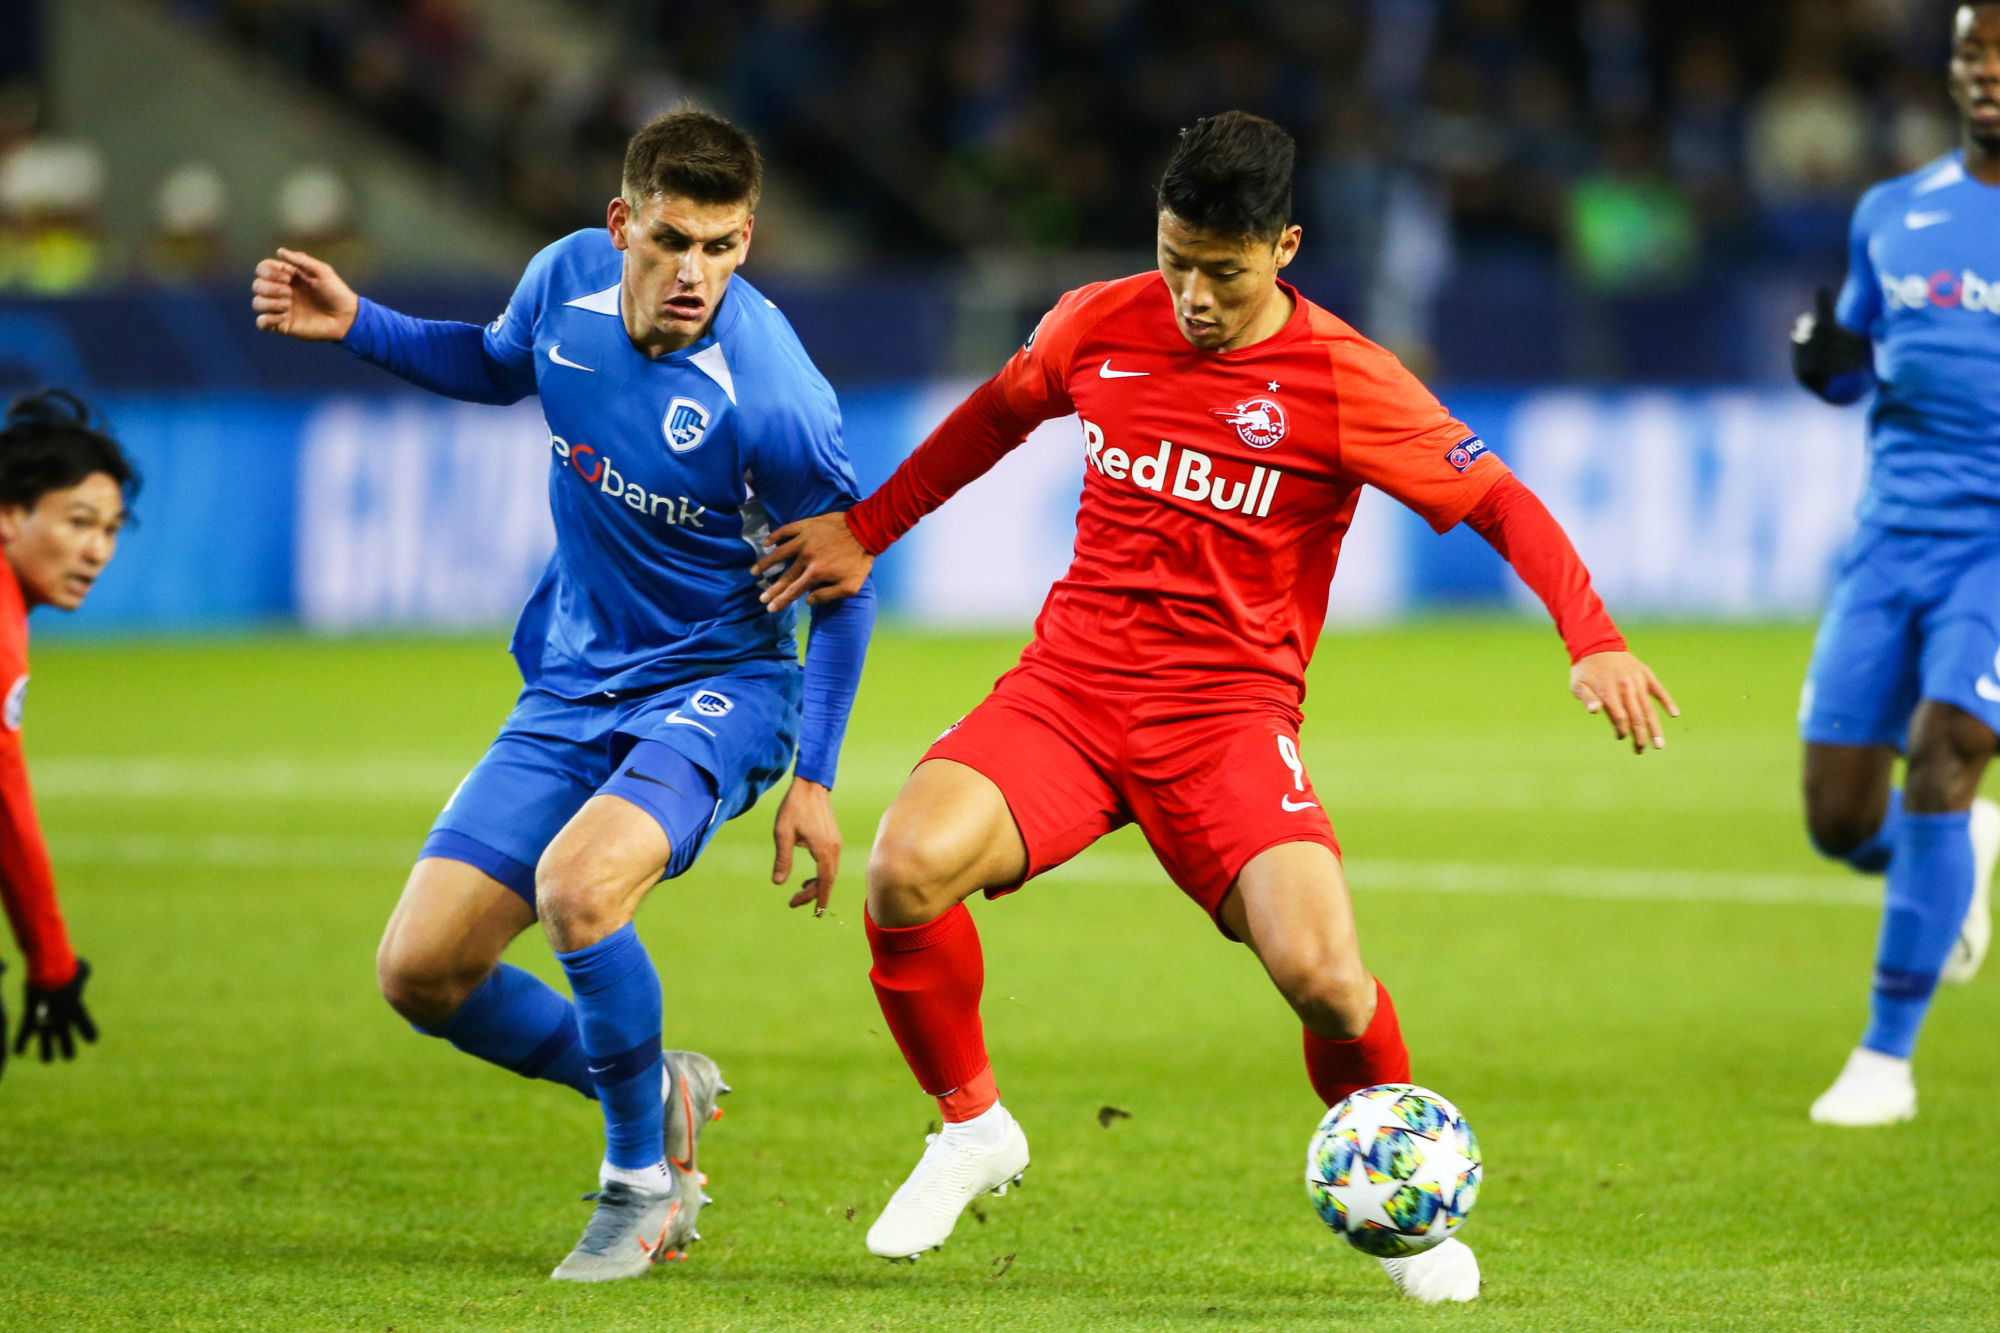 GENK,BELGIUM,27.NOV.19 - SOCCER - UEFA Champions League, group stage, KRC Genk vs Red Bull Salzburg. Image shows Joakim Maehle (Genk) and Hee Chan Hwang (RBS). Photo: GEPA pictures/ Mathias Mandl 

Photo by Icon Sport - Joakim MAEHLE PEDERSEN - Hwang HEE-CHAN - Luminus Arena - Genk (Belgique)